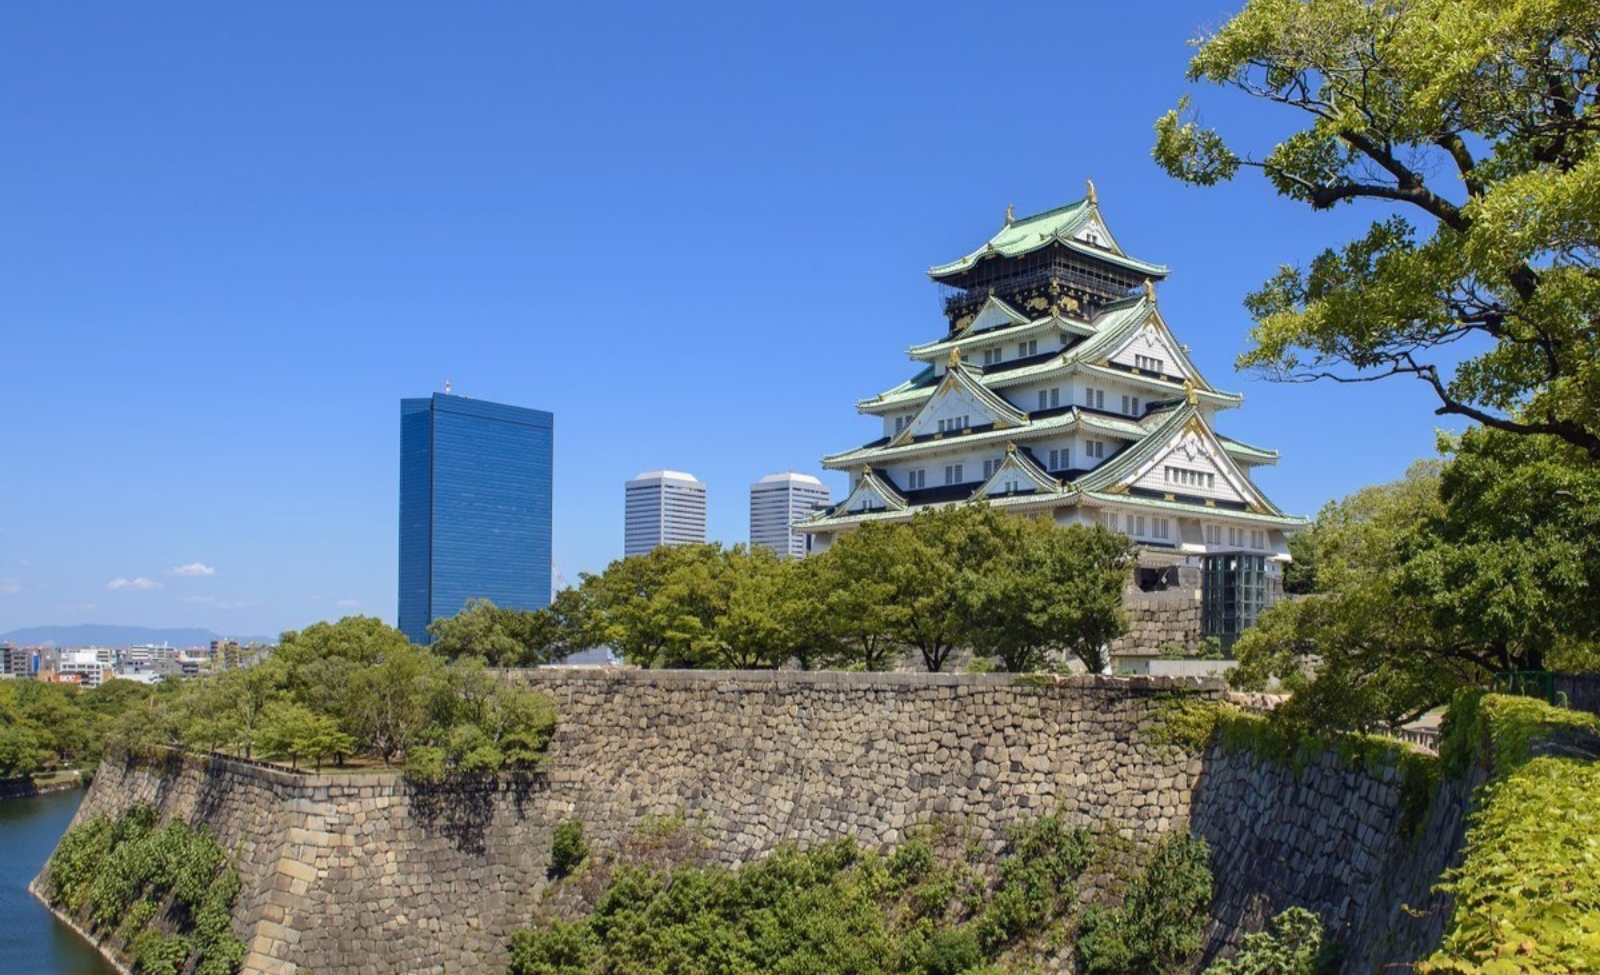 Best Places to Go in Osaka: Your Ultimate Guide to Must-See Attractions